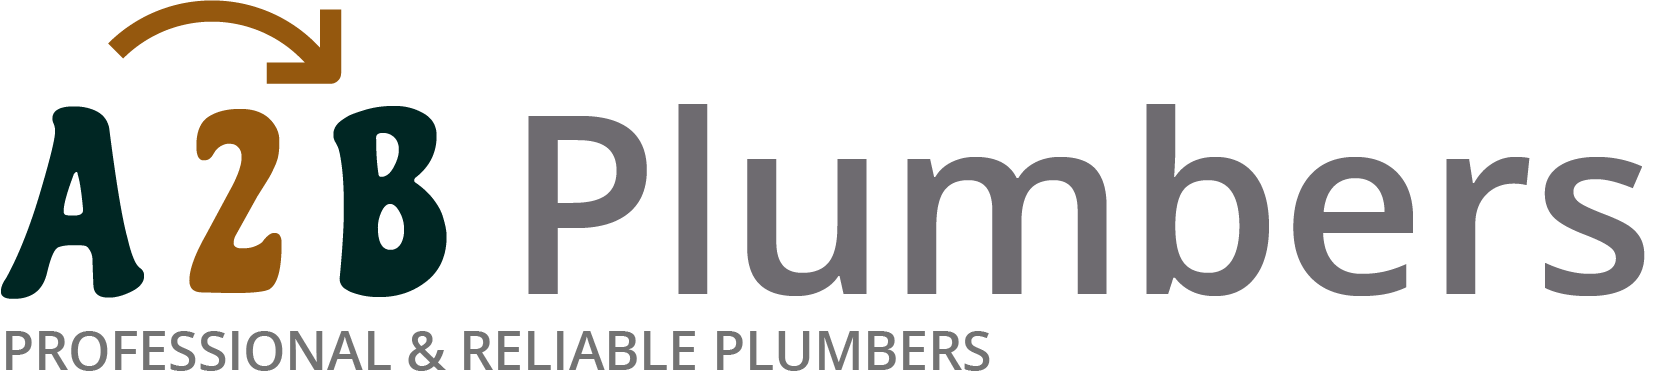 If you need a boiler installed, a radiator repaired or a leaking tap fixed, call us now - we provide services for properties in Wapping and the local area.